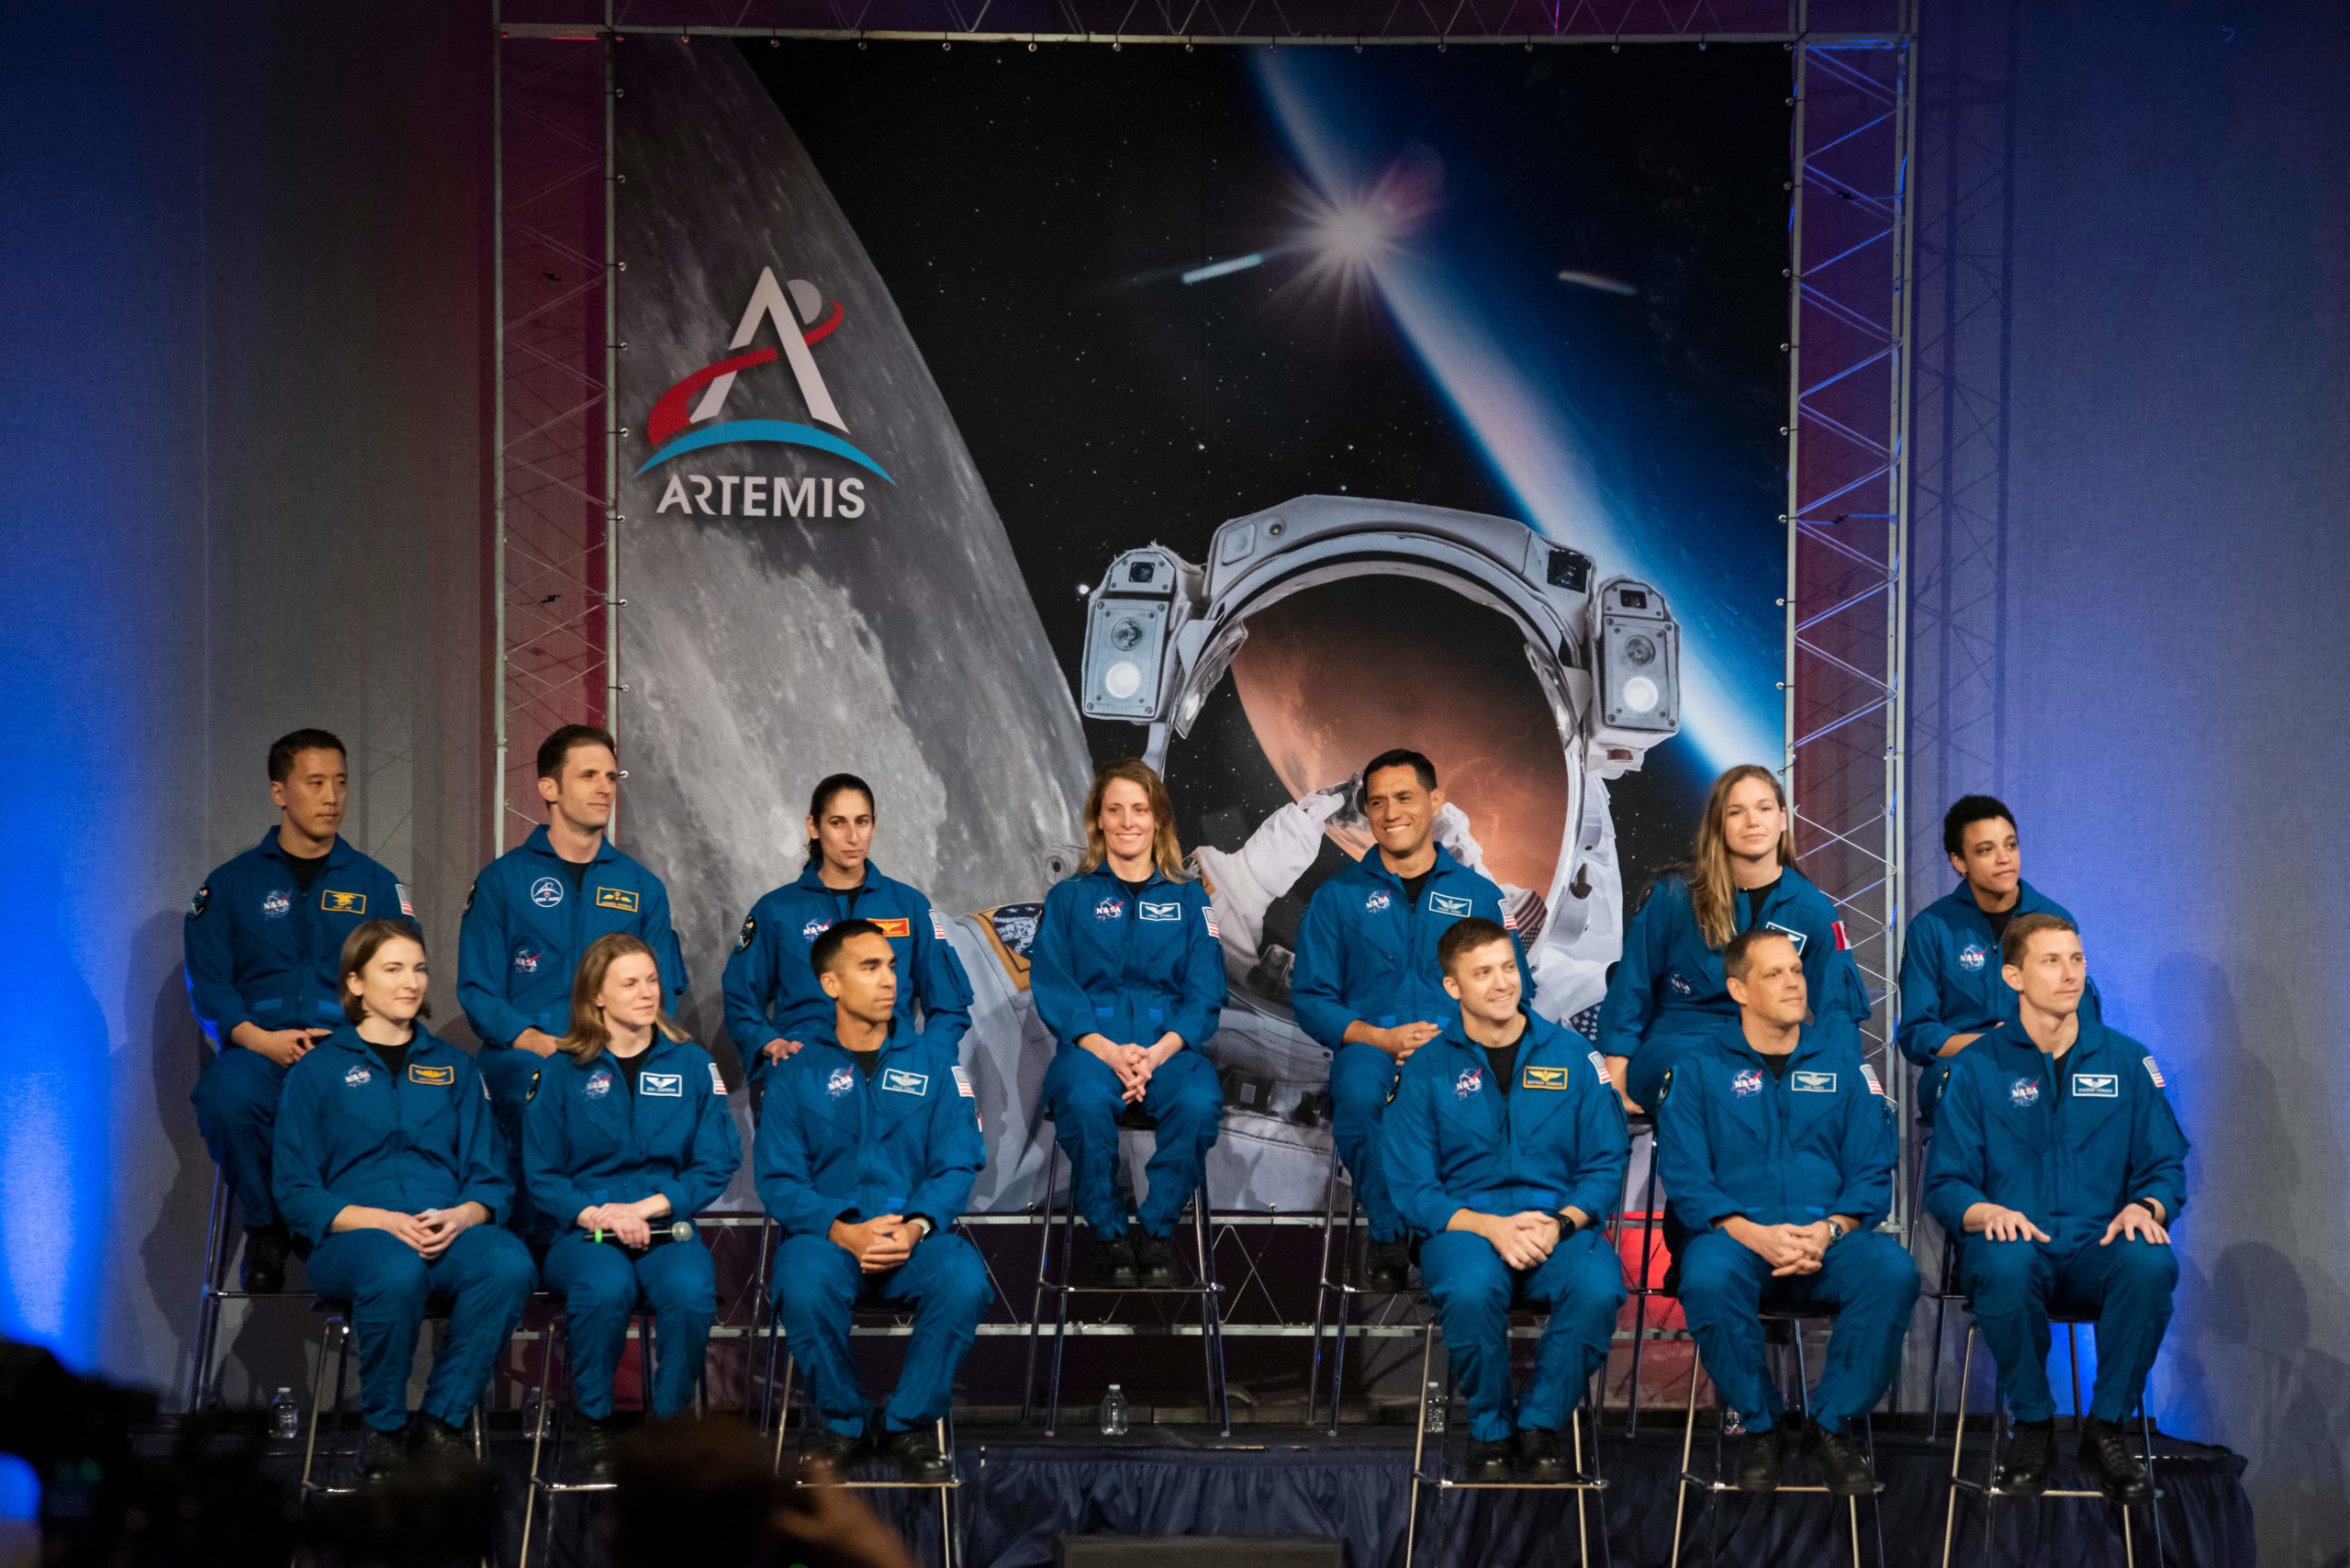 NASA and Canadian Space Agency (CSA) astronauts are introduced during their graduation at Johnson Space Center in Houston Texas. They are the first candidates to graduate under the Artemis program (Photo by MARK FELIX/AFP via Getty Images)